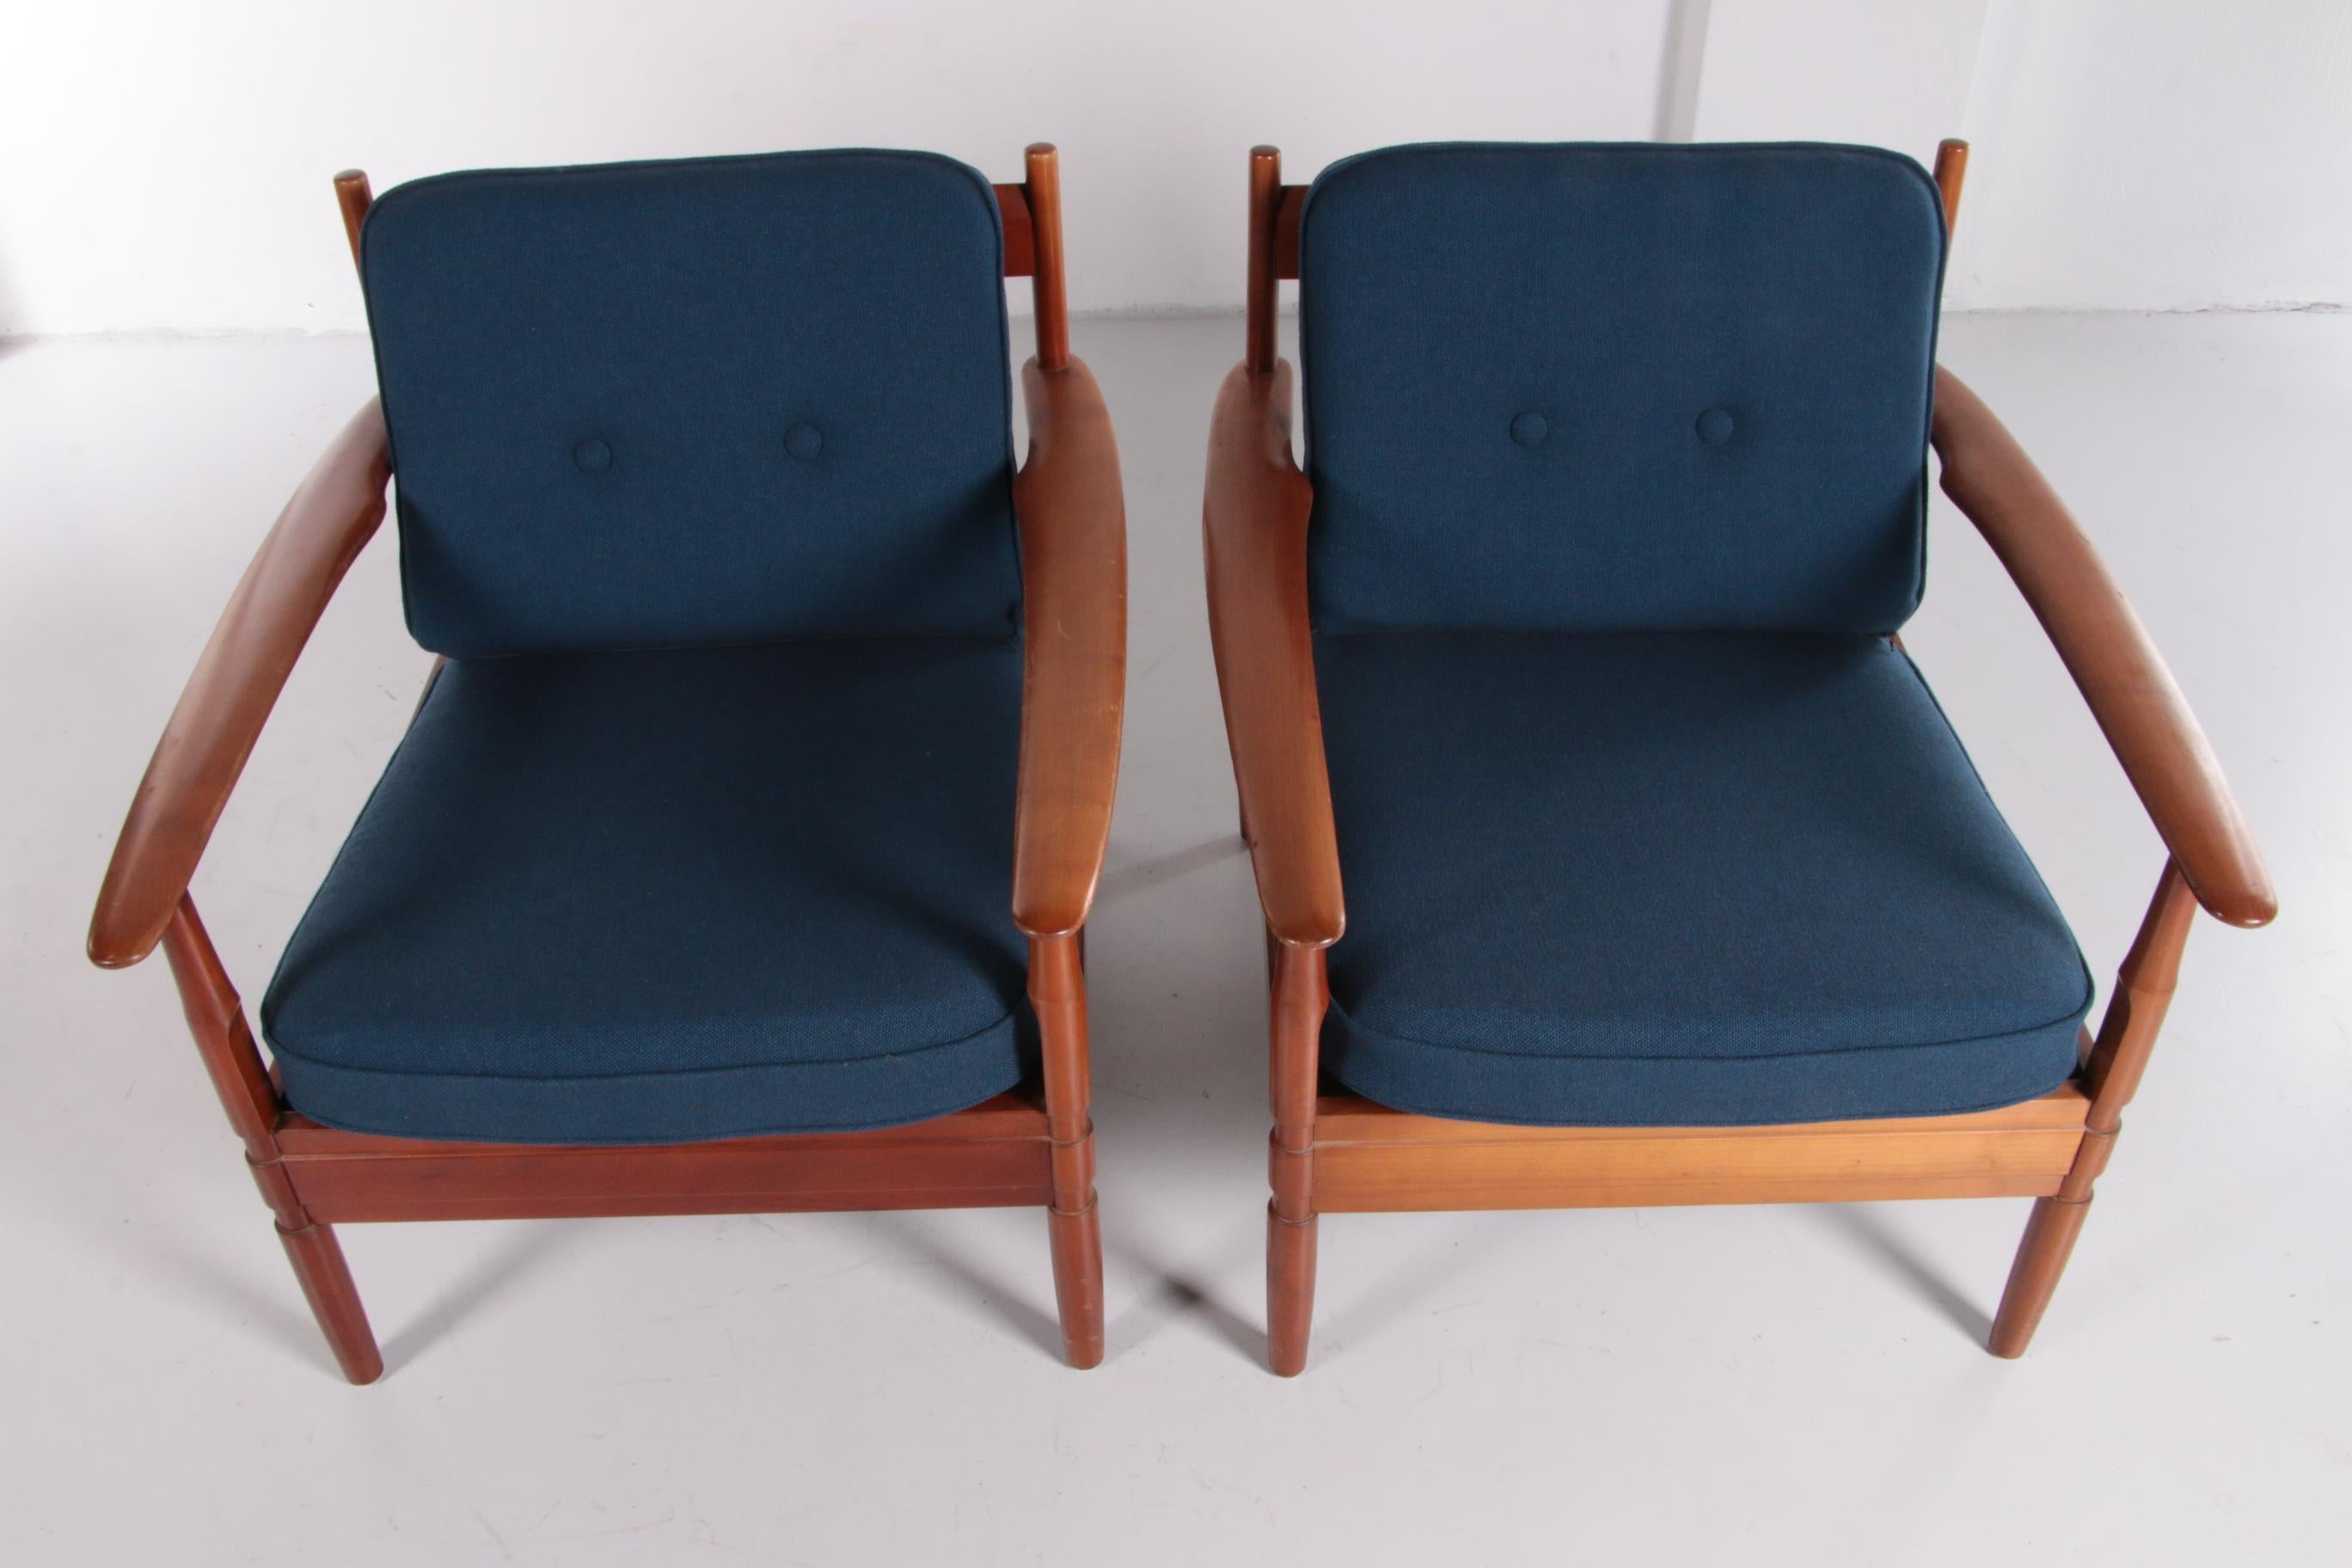 Mid-20th Century Vintage Set of Armchairs Grete Jalk Made by France and Son, 1960 Denmark For Sale